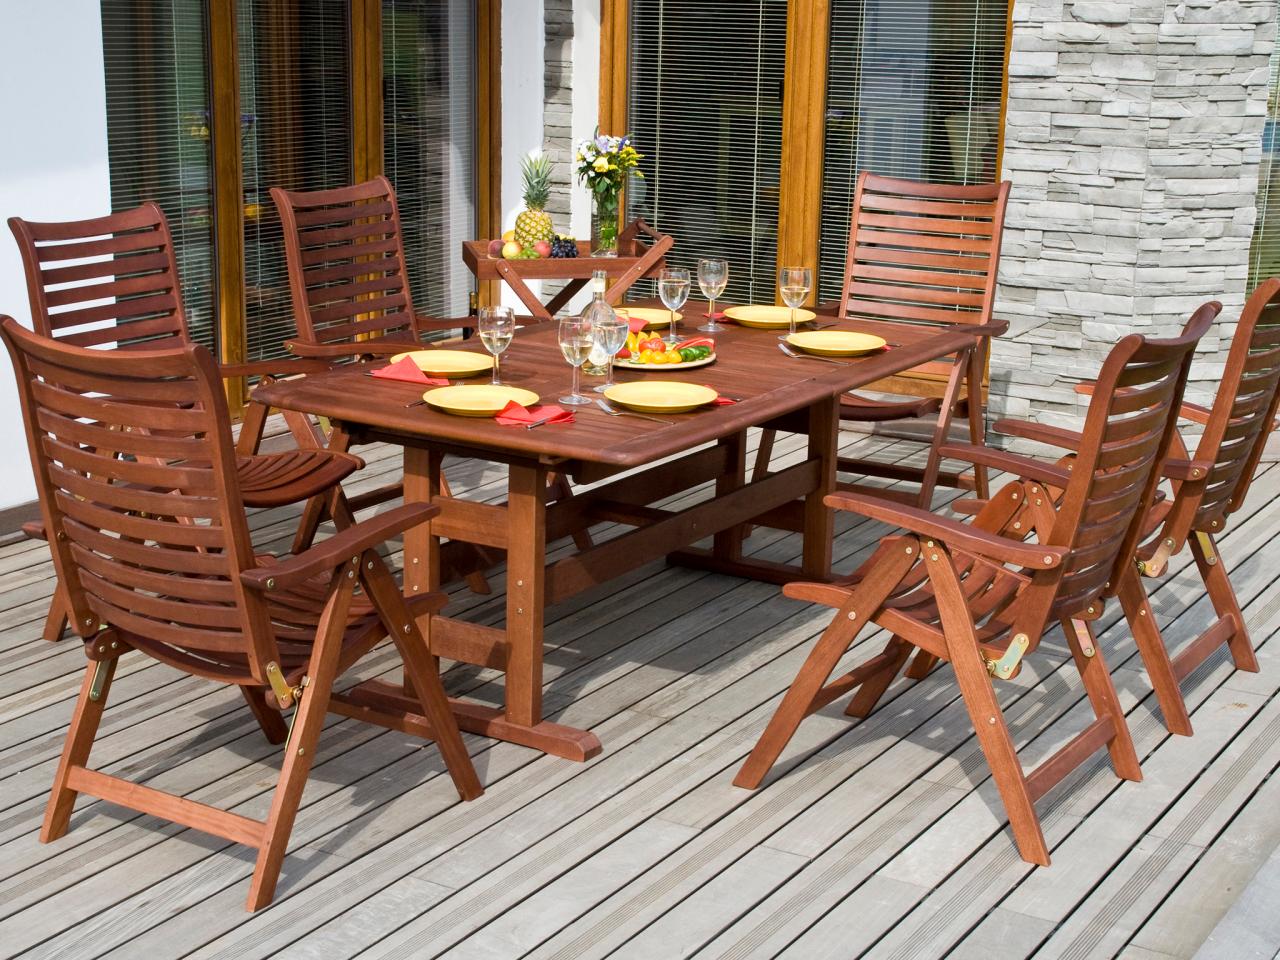 Tips for Refinishing Wooden Outdoor Furniture | DIY